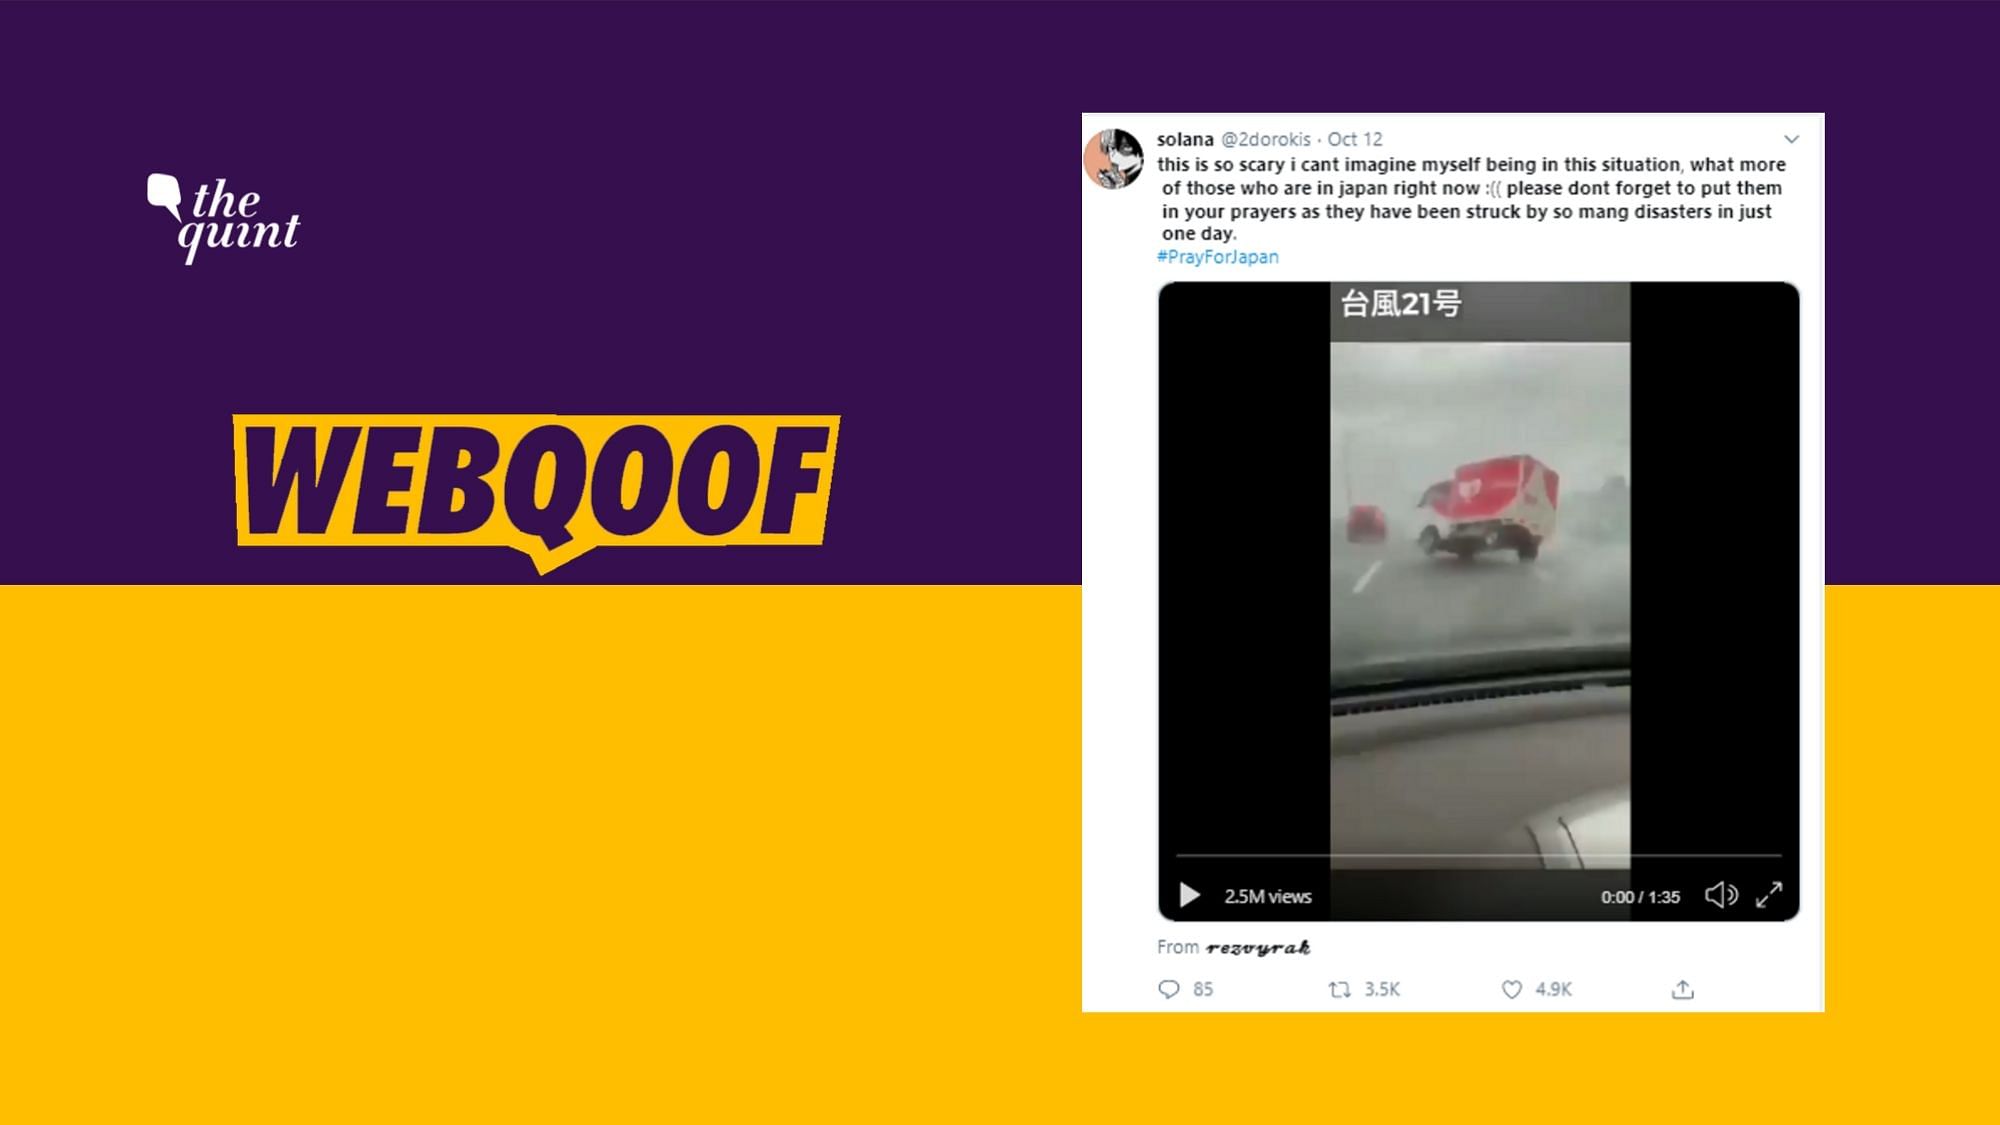 A video is being shared on Twitter by multiple users with a claim that it shows destruction caused by Typhoon Hagibis in Japan.